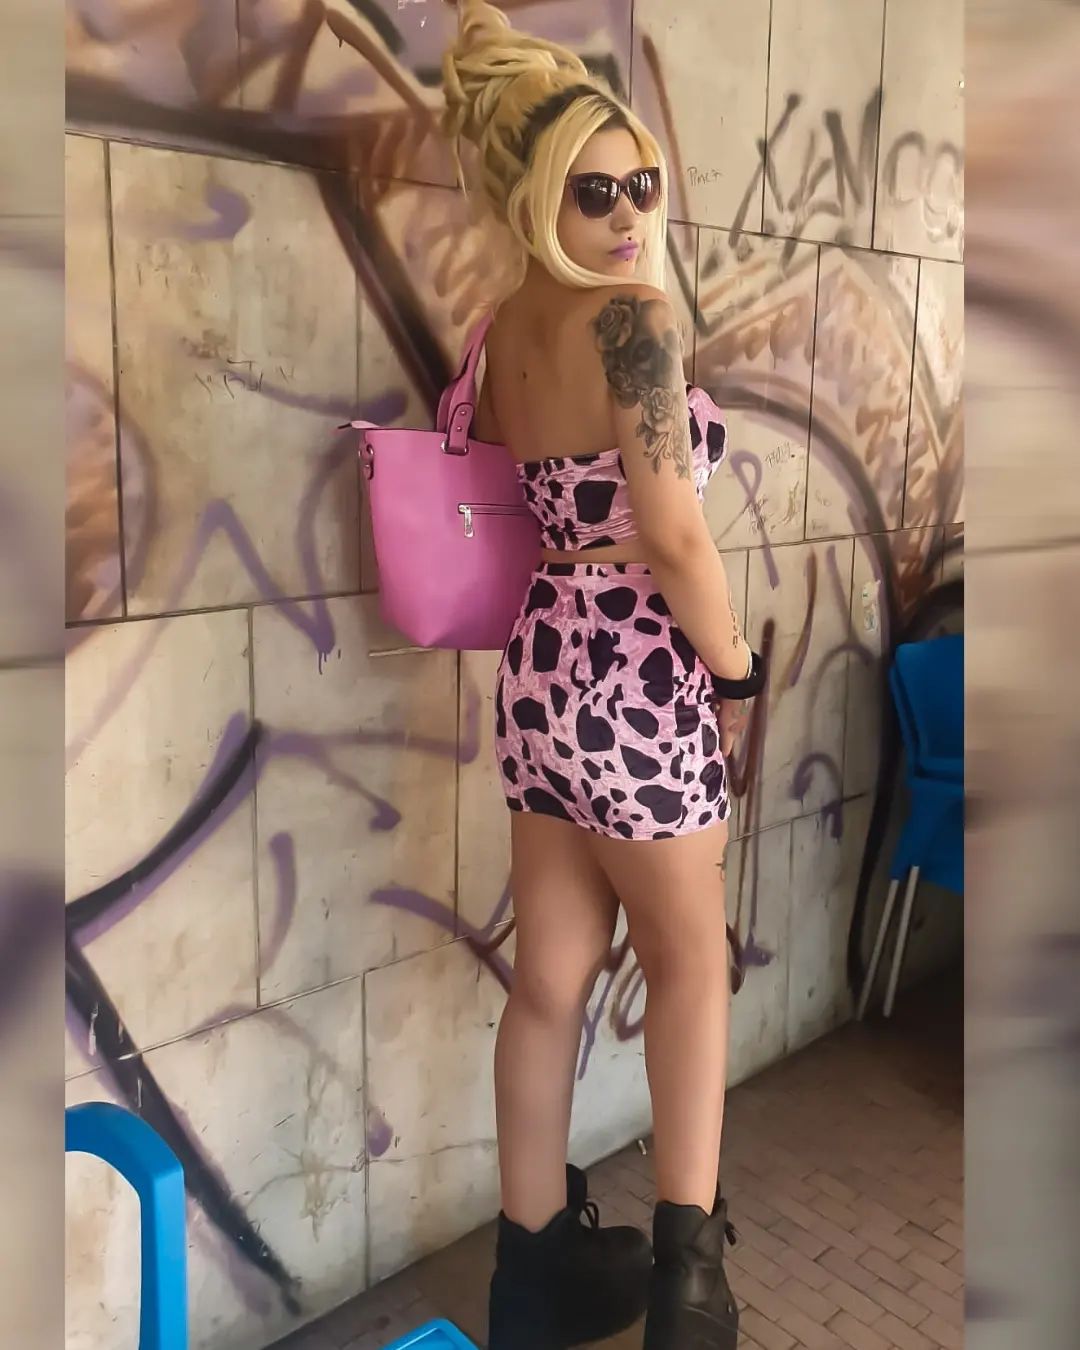 Si vede che odio il rosa e leopardato...... 
Completo di @shein_it 💖🖤
#girl #beauty #blonde #blondegirl #dreadlocks #dreads #dreadgirl #alternative #alternativegirl #inkmodel #ink #italiangirl #italian #look #pink #modelgirl #me #model #outfit #piercings #piercing #shein #tattoos #tattoo #tattoogirl #totalpink 
#follower --> #onlyfans link in bio🔥